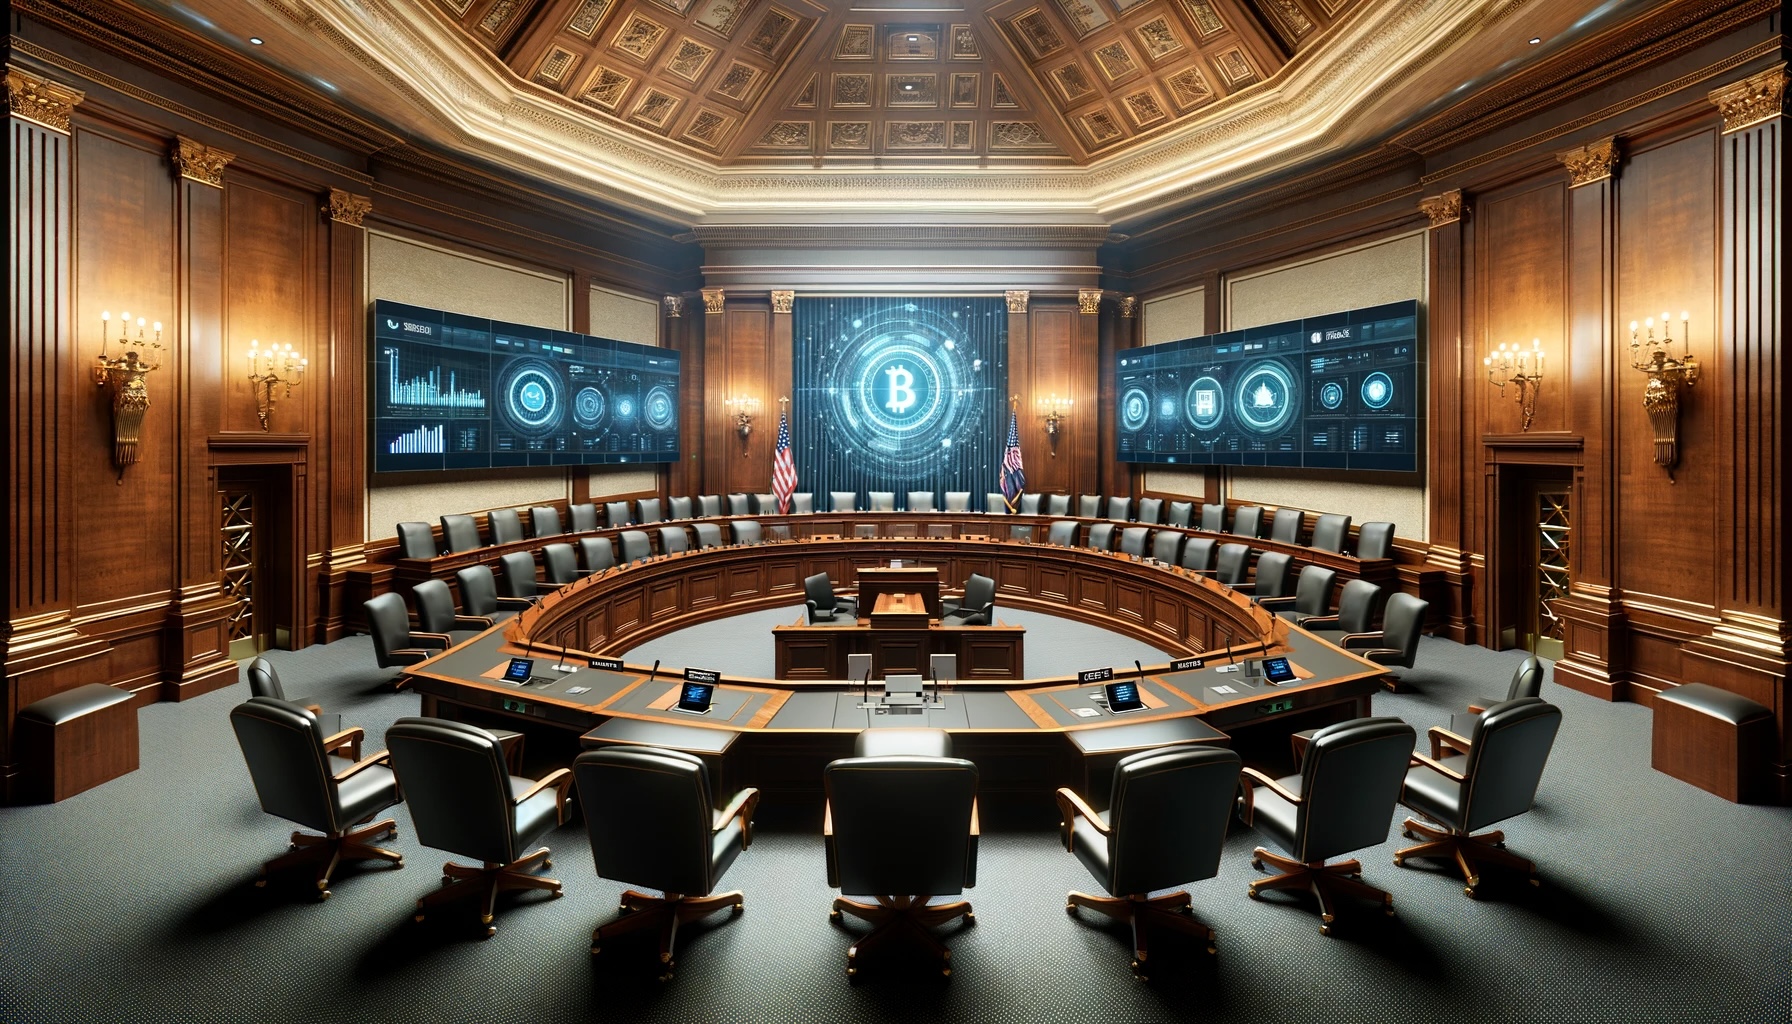 Spotlight on AI, digital assets at House subcommittee hearing